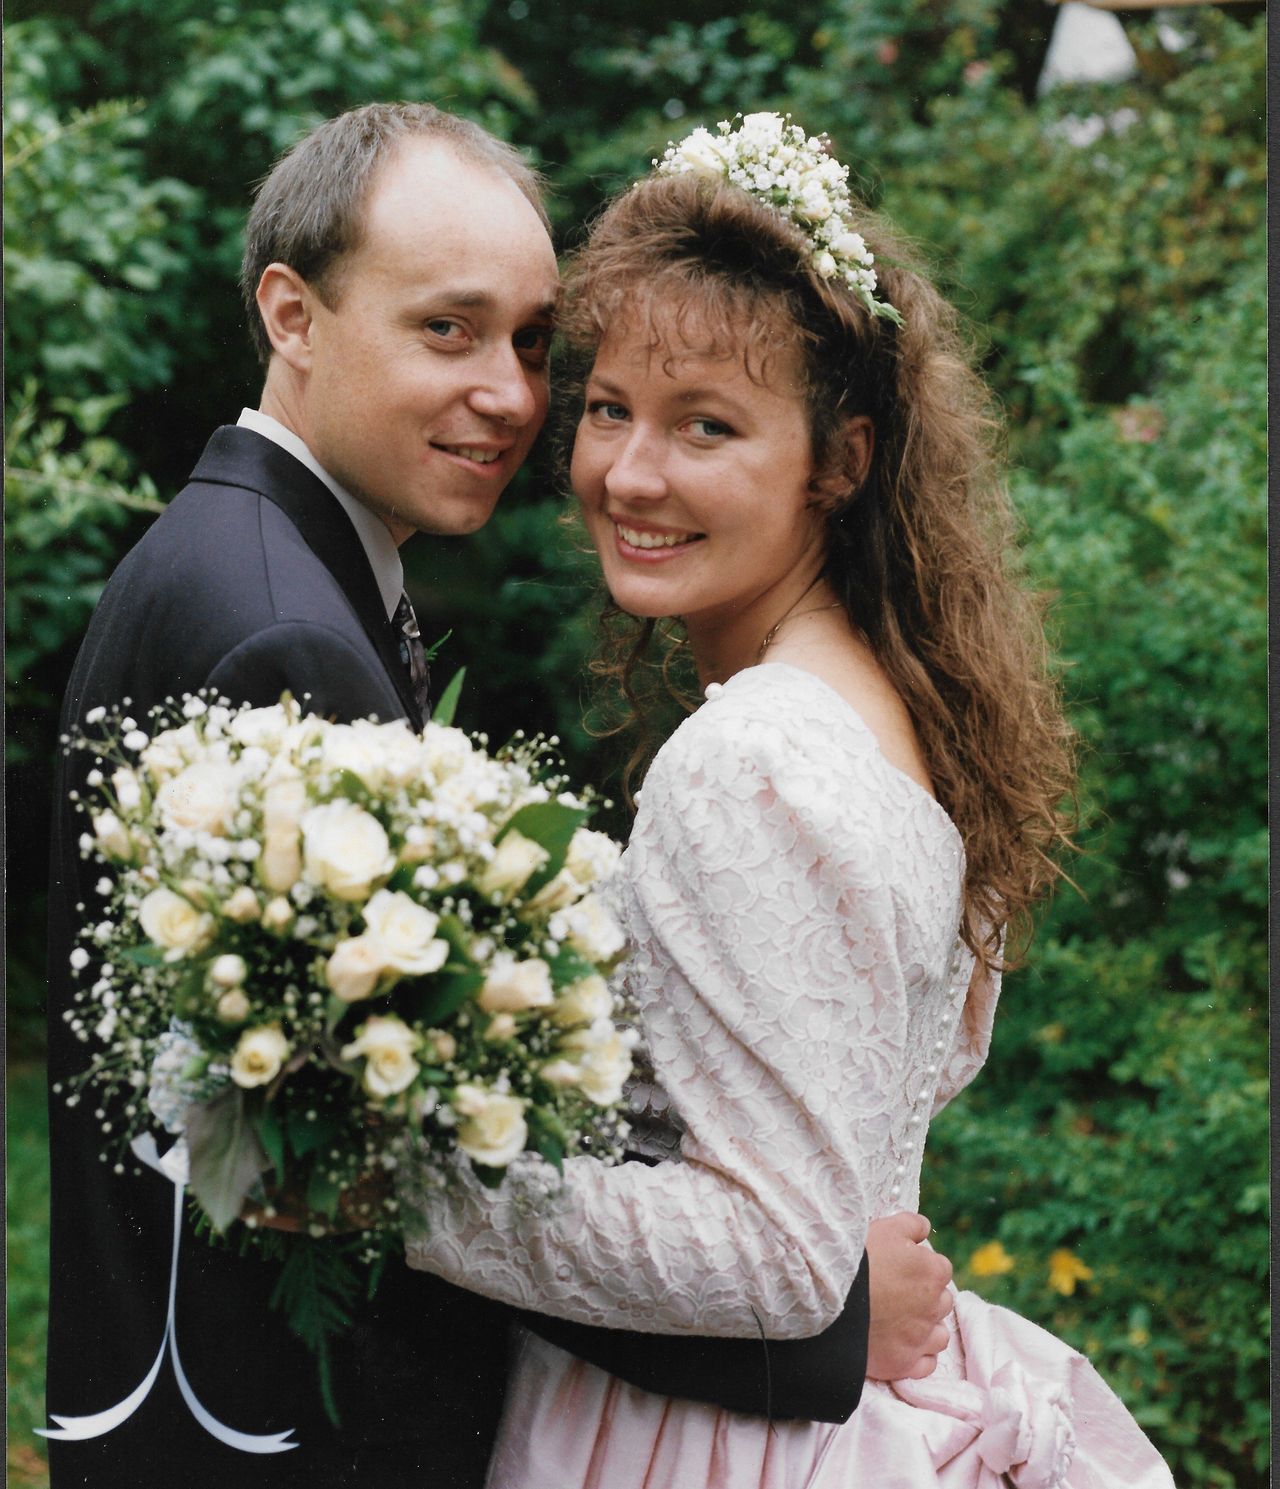 The Hodgkins on their wedding day